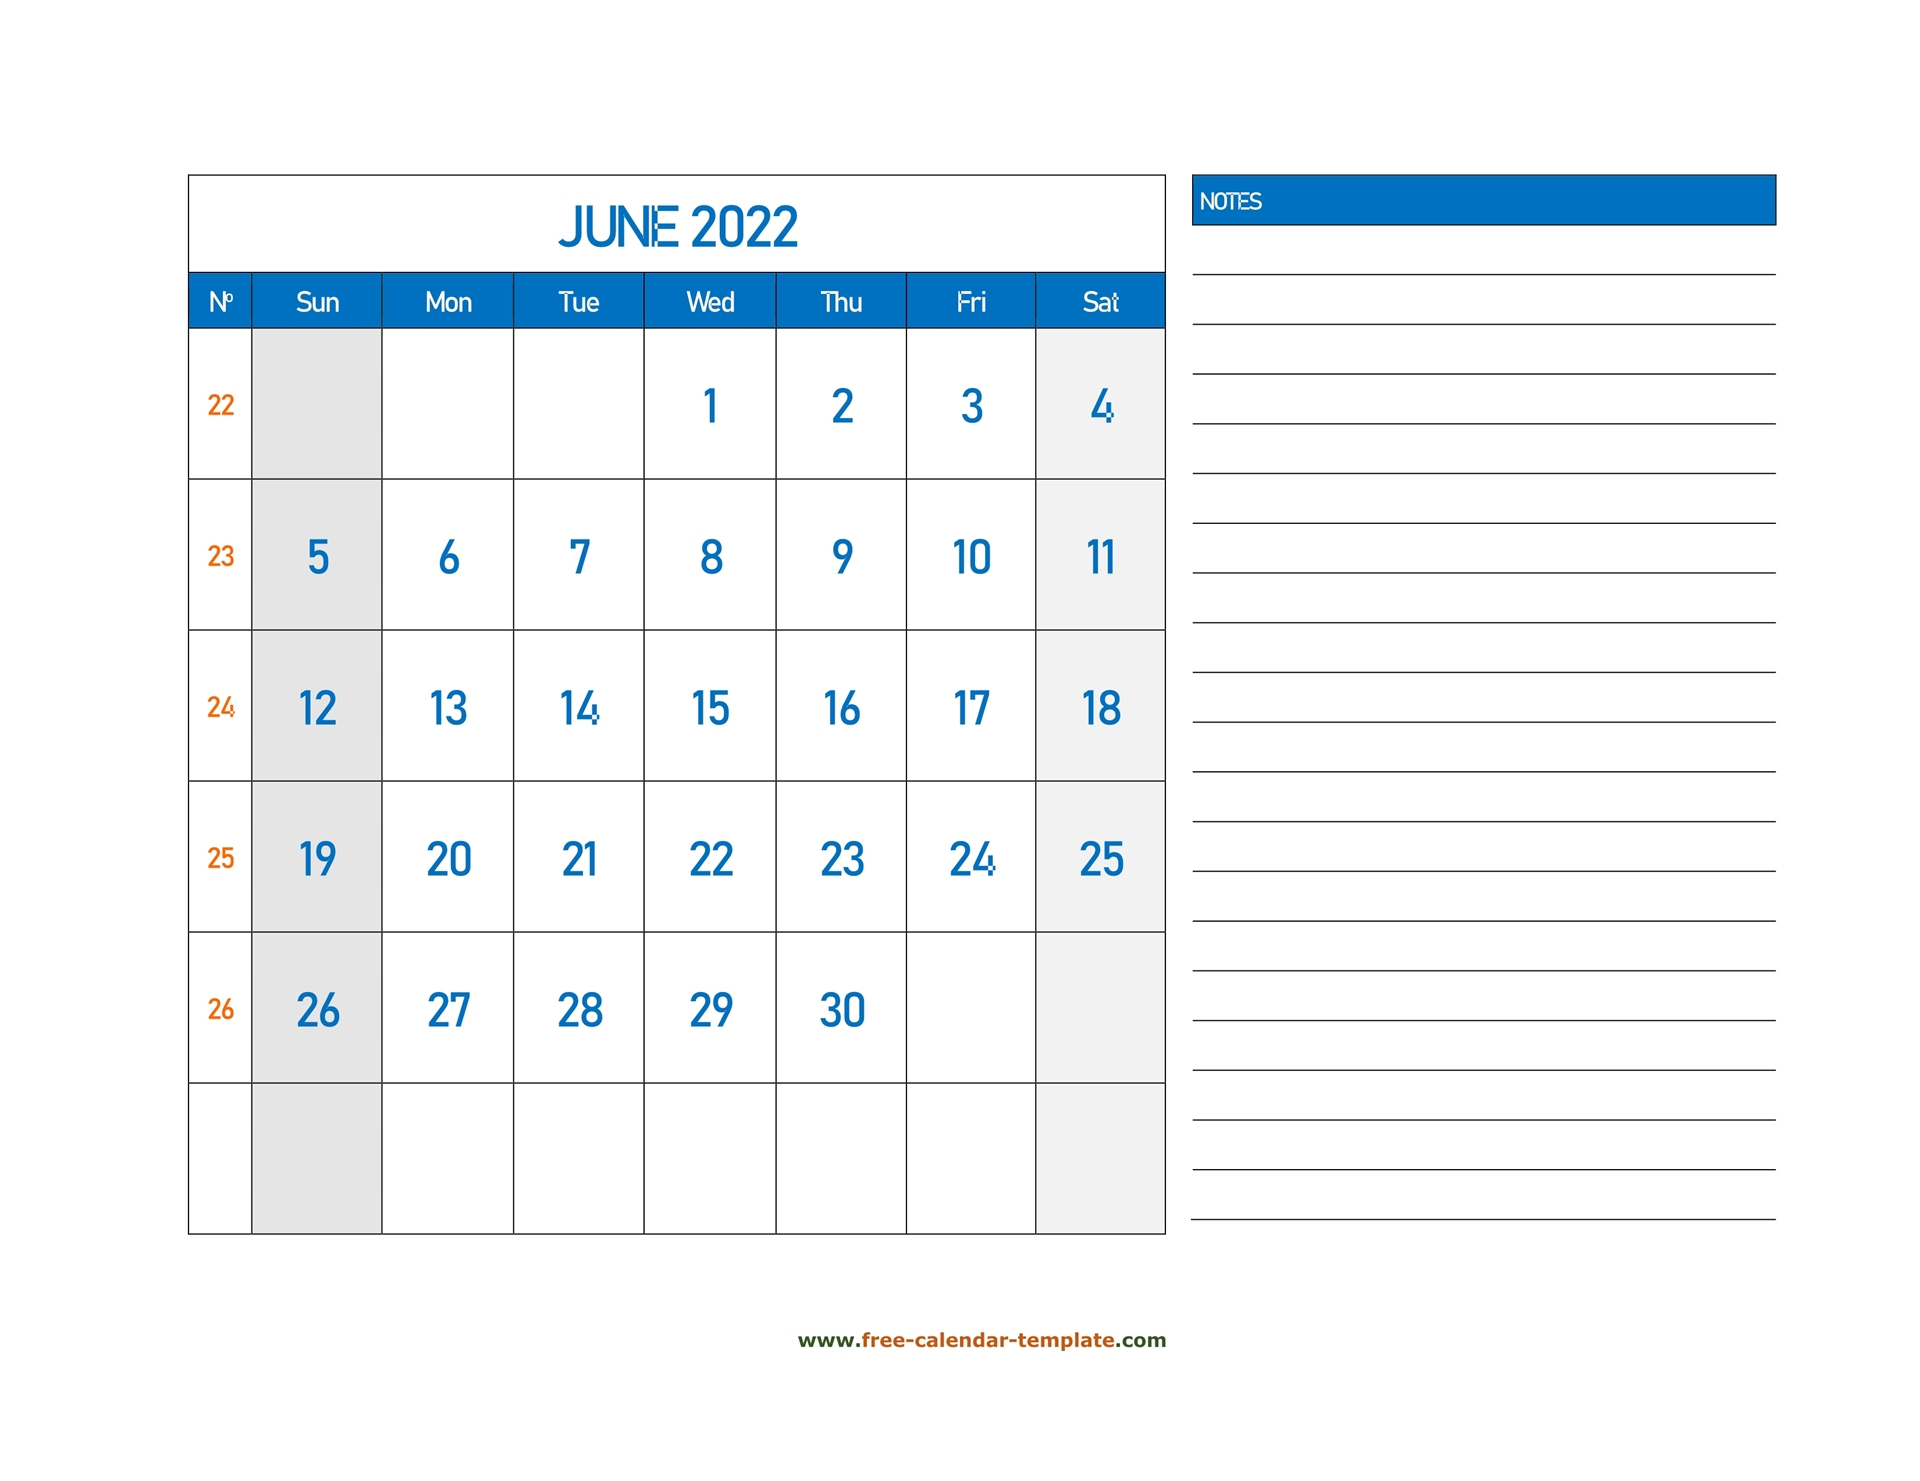 June Calendar 2022 Grid Lines For Holidays And Notes